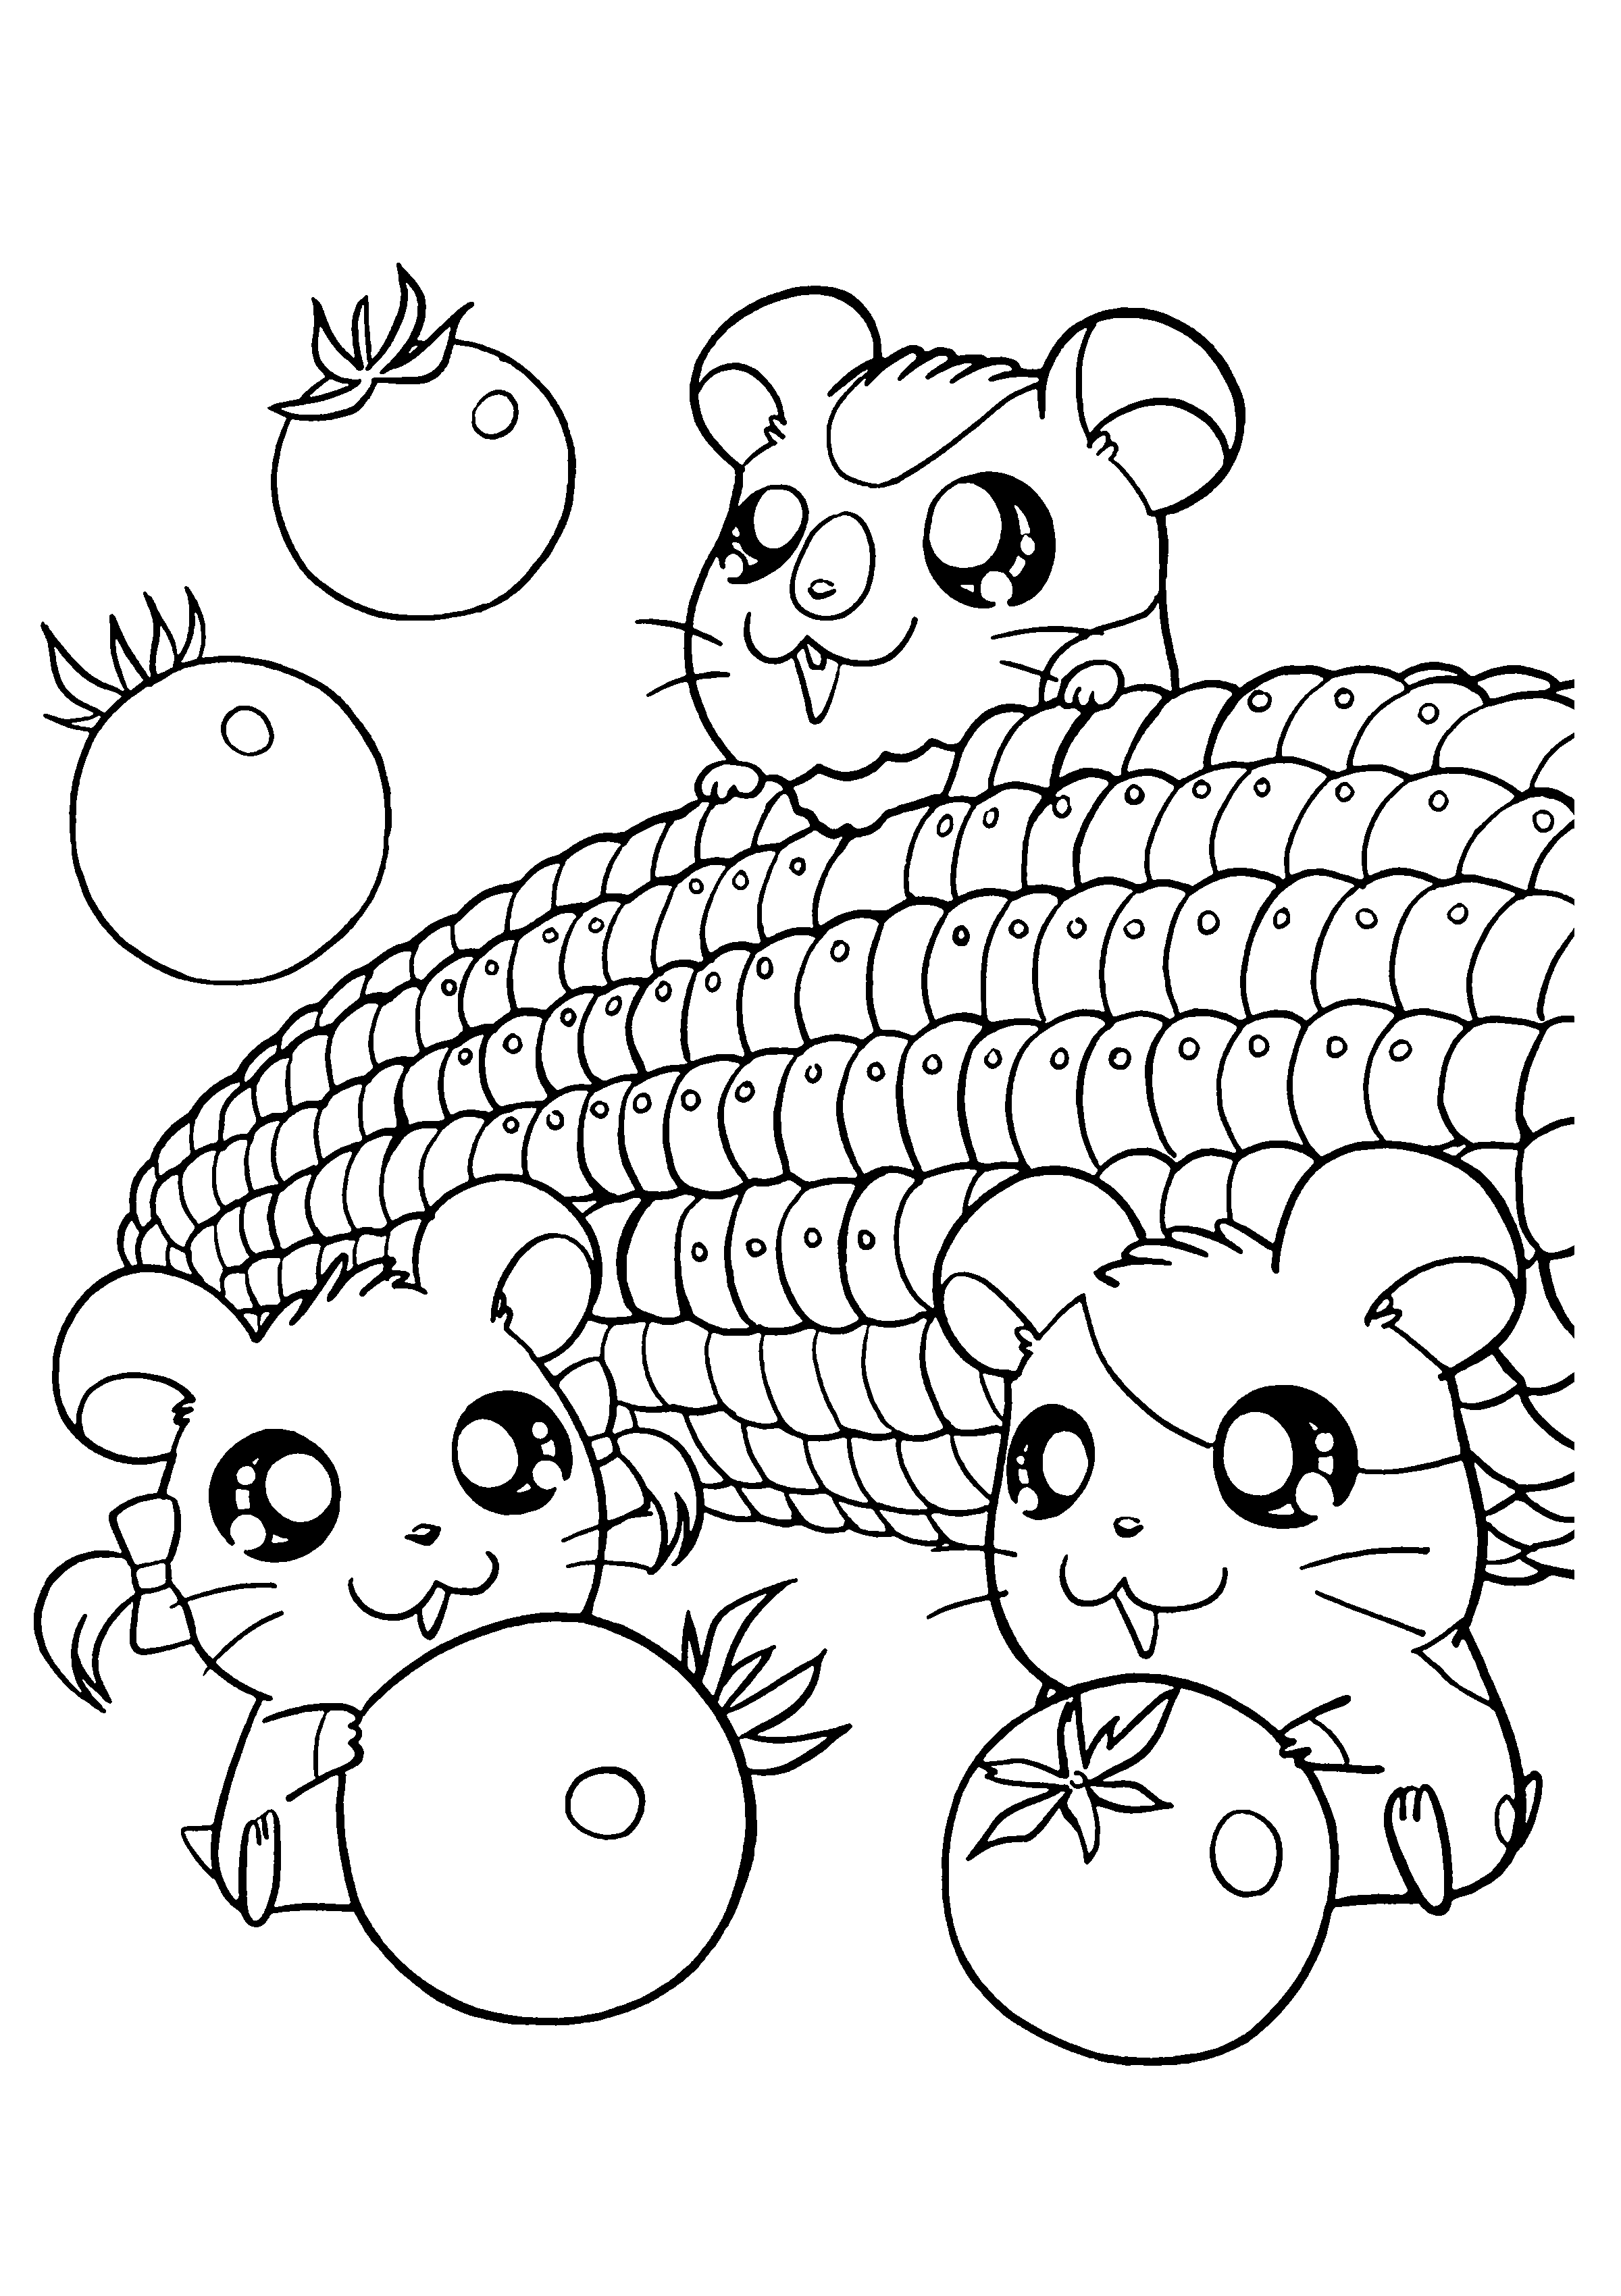 Kawaii Coloring Pages   Best Coloring Pages For Kids